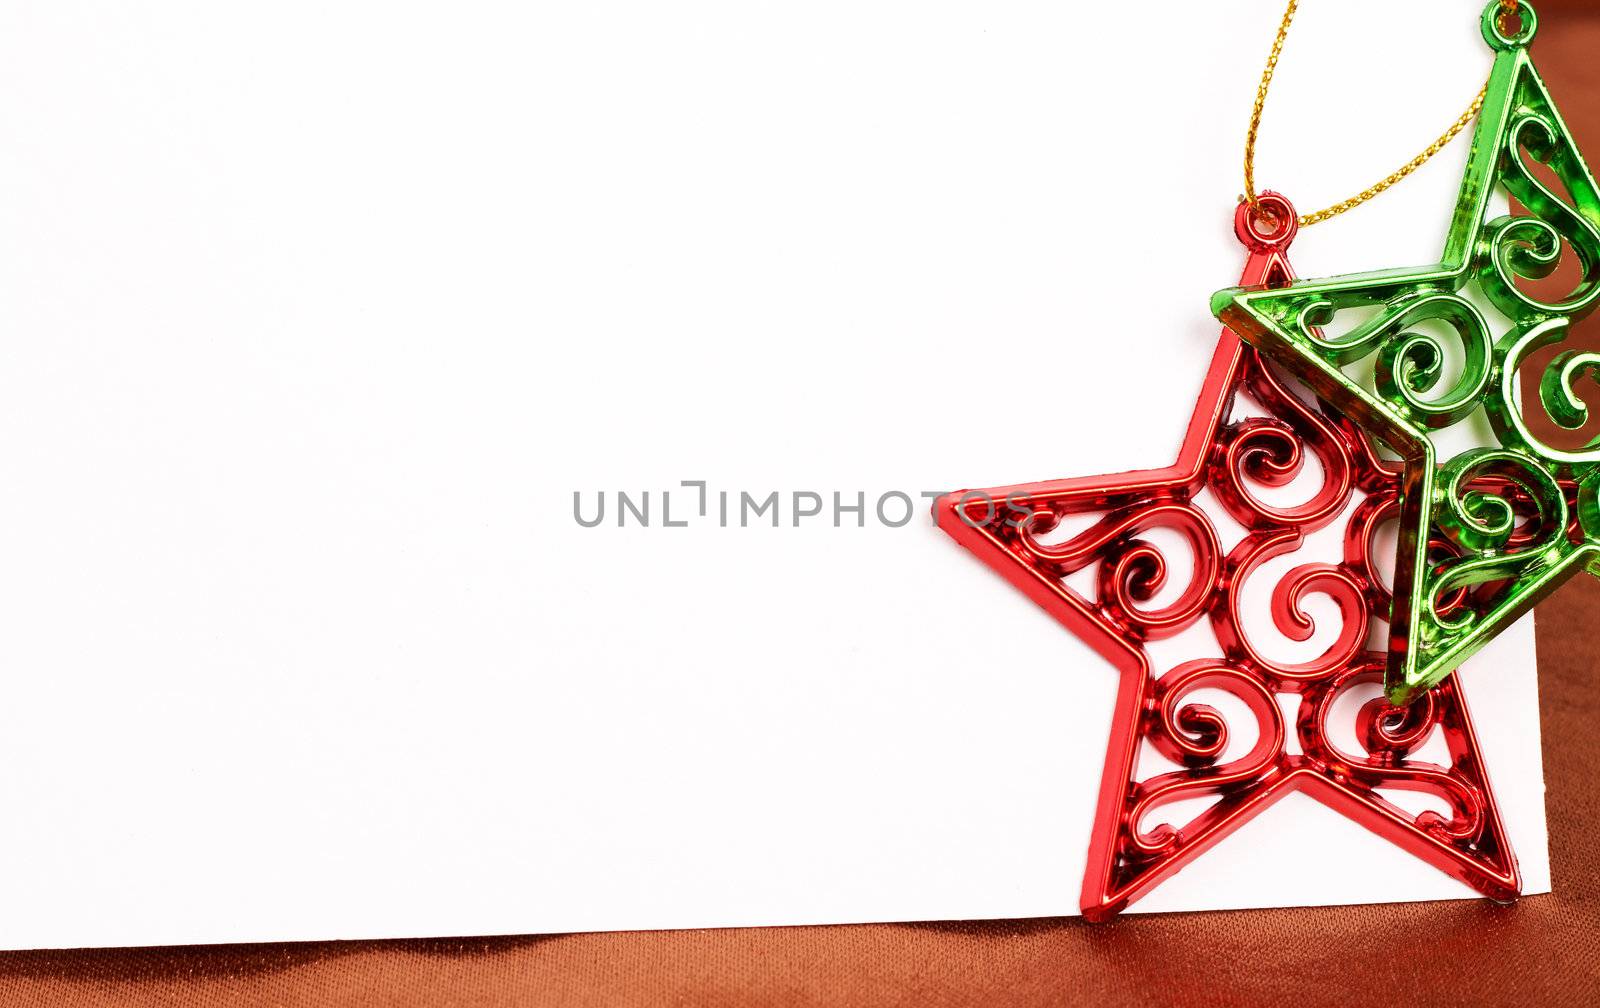 Two Christmas star decorations and card by Elenat